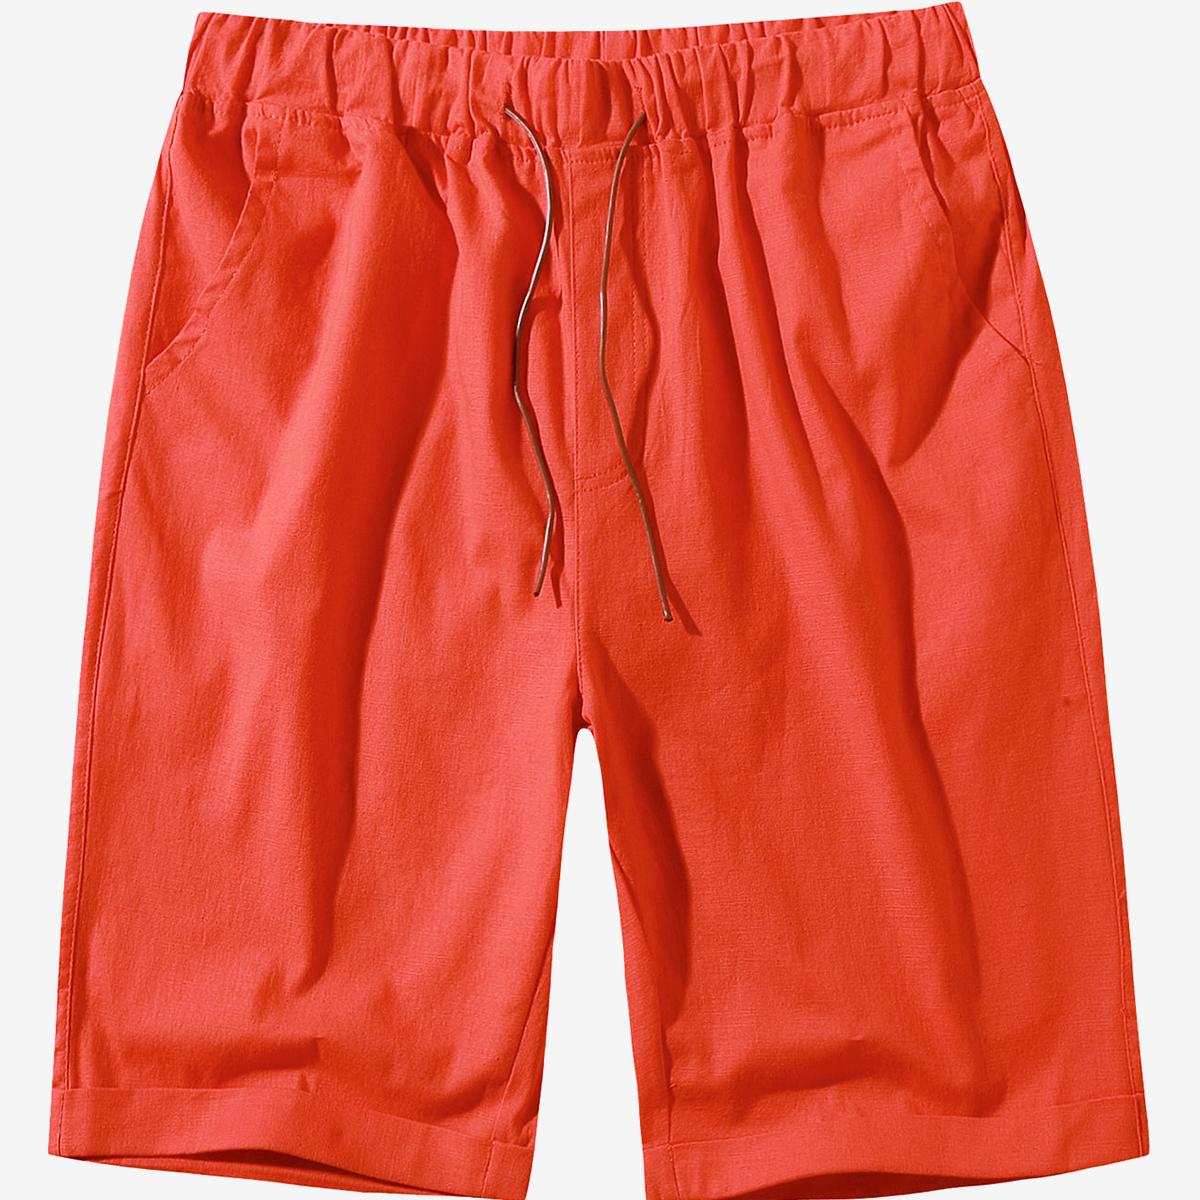 Men's Casual Solid Color Breathable Cotton Shorts